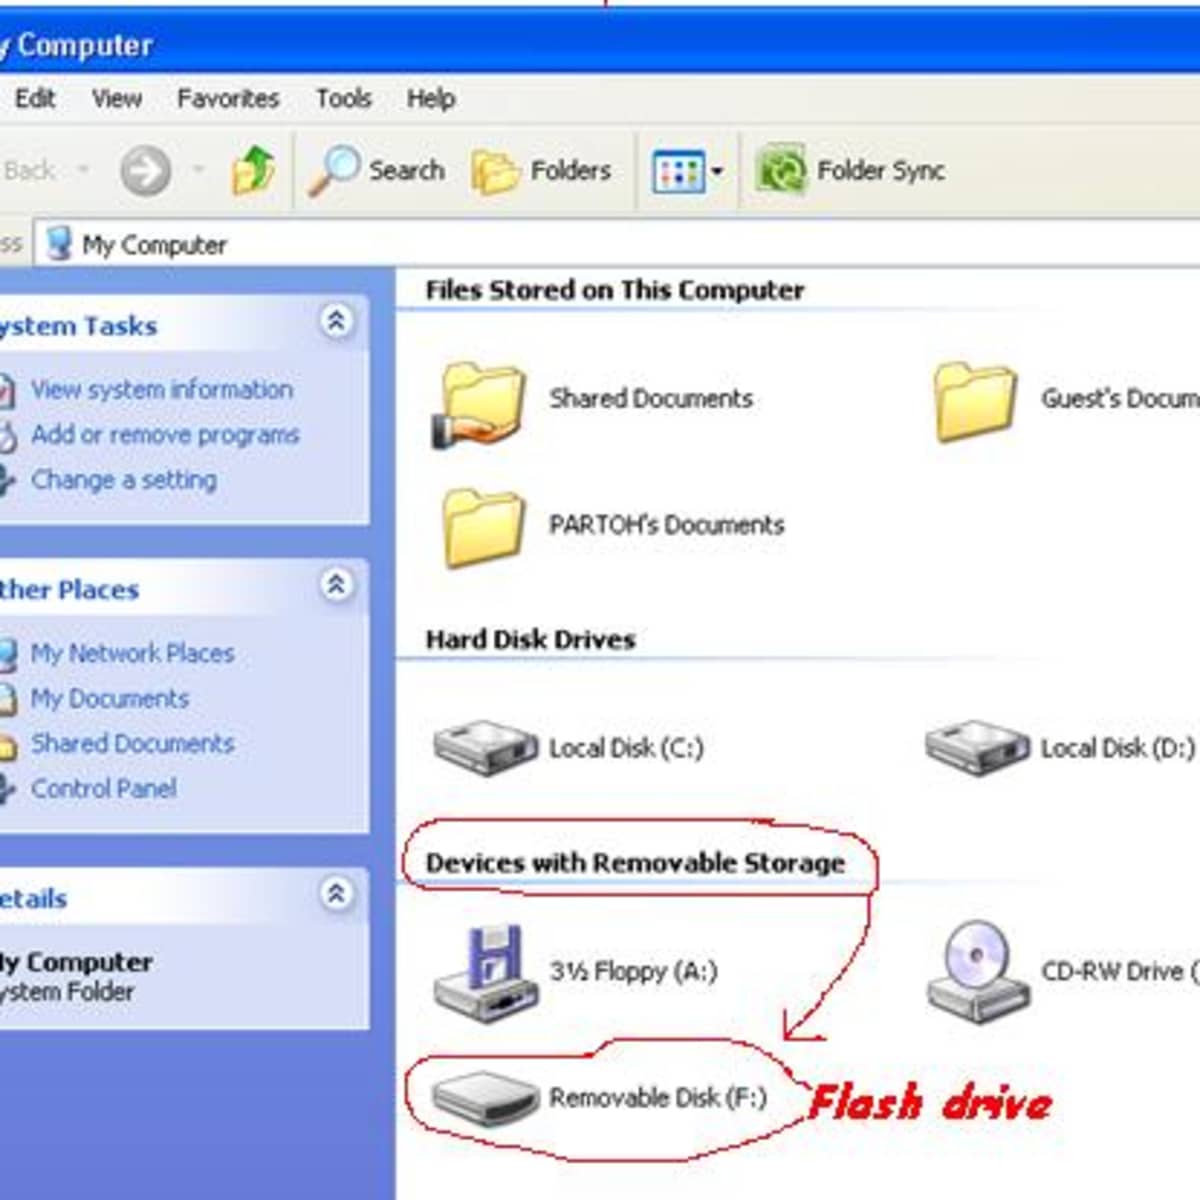 Erase the USB drive by clicking on the Erase button and choosing the appropriate format.
Rename the USB drive to a recognizable name.